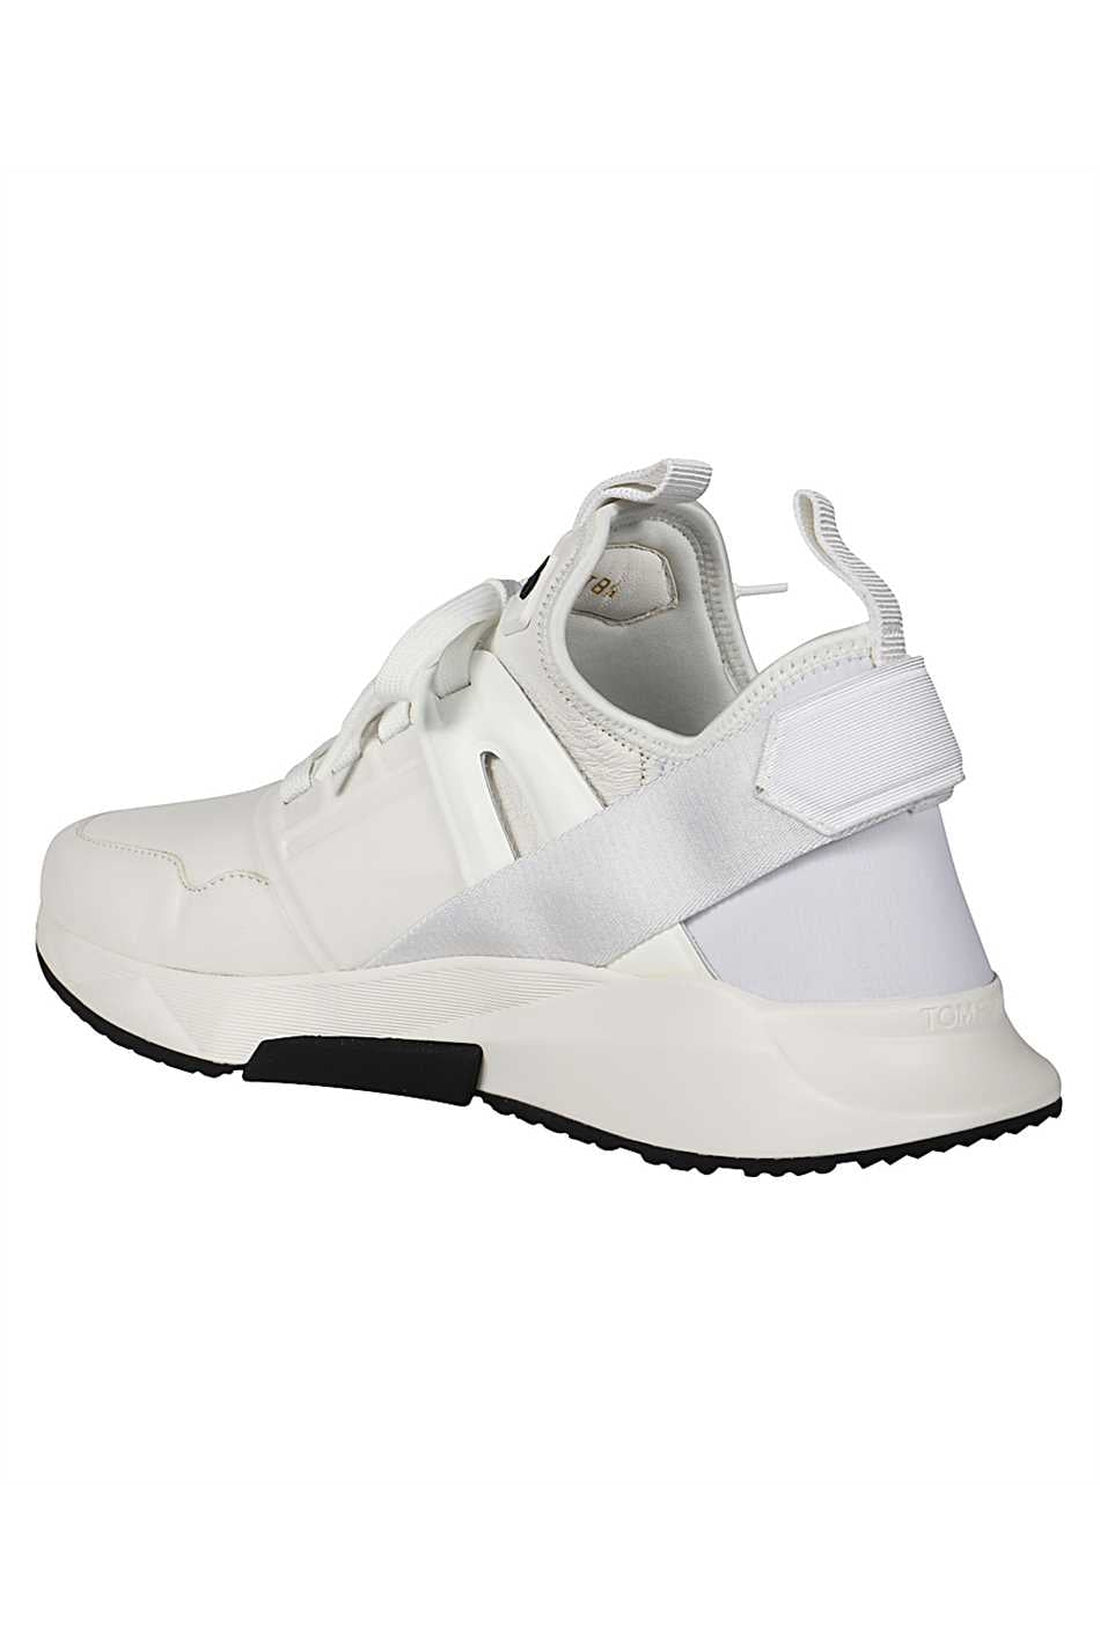 Tom Ford-OUTLET-SALE-Jago low-top sneakers-ARCHIVIST